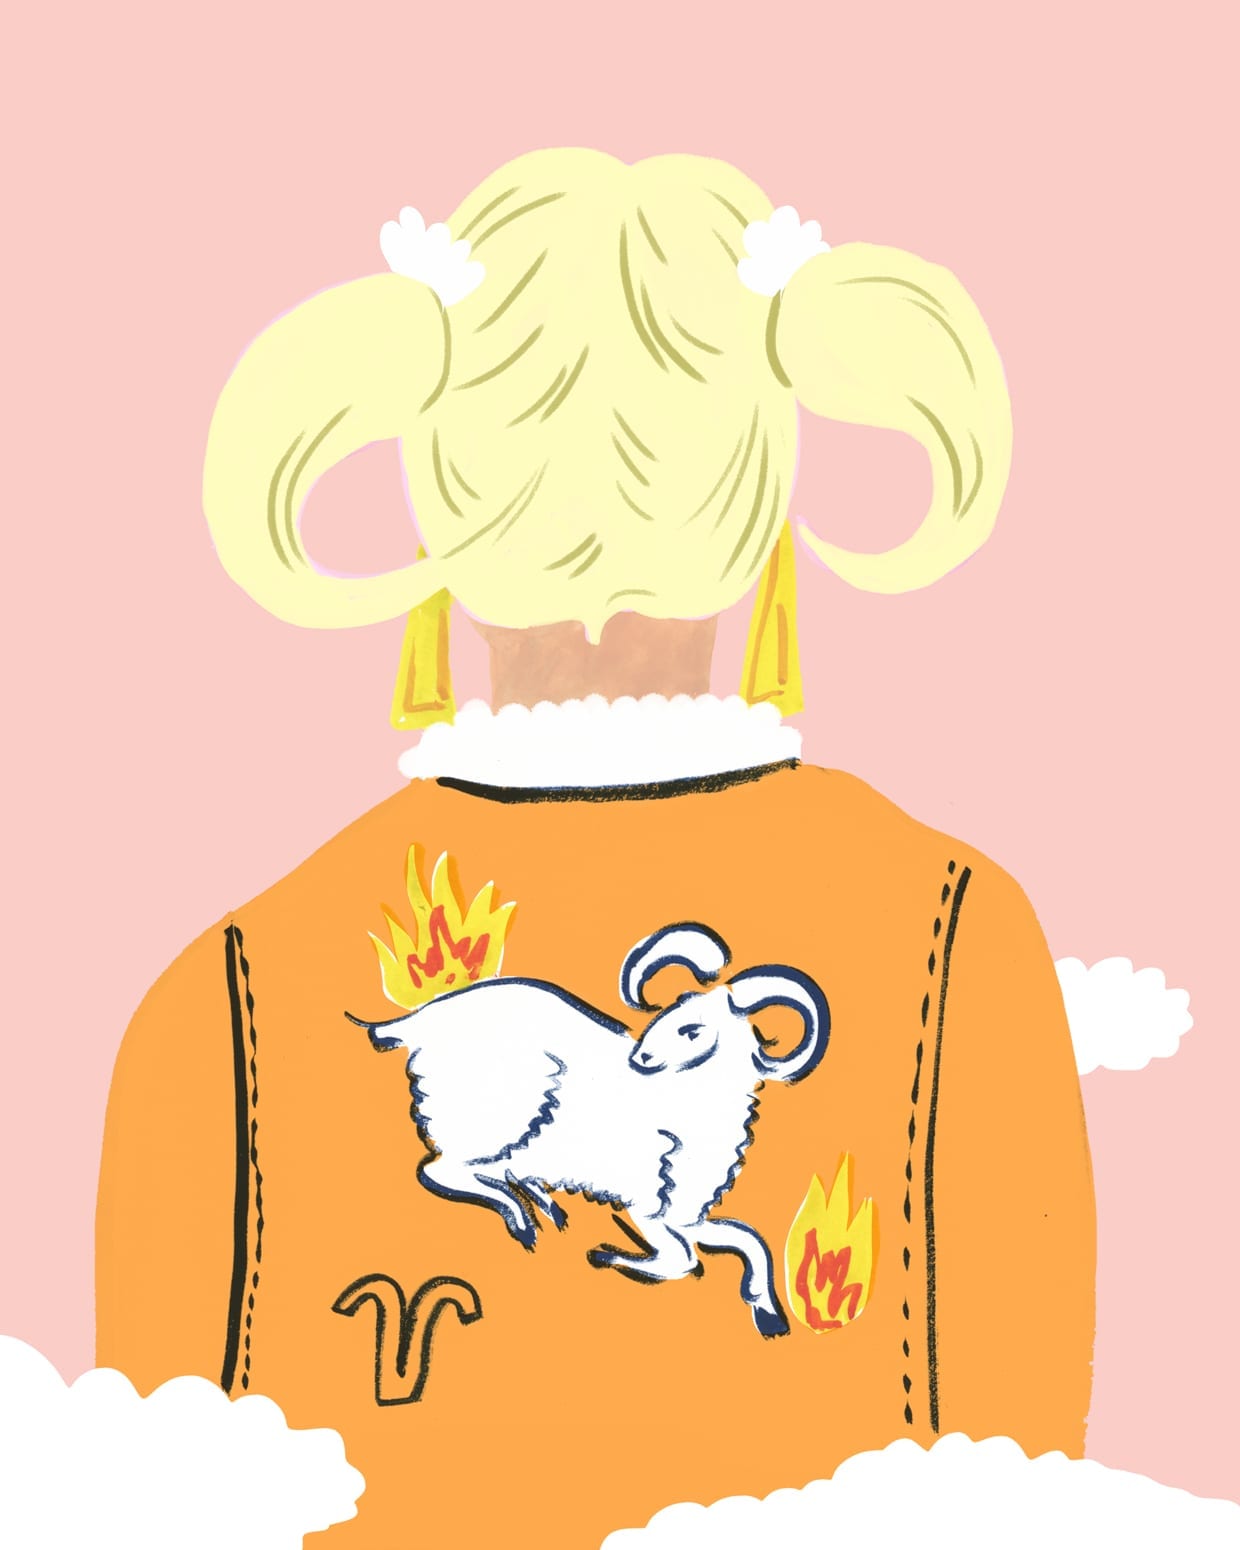 An illustration of woman from behind wearing a jacket with a goat on it.